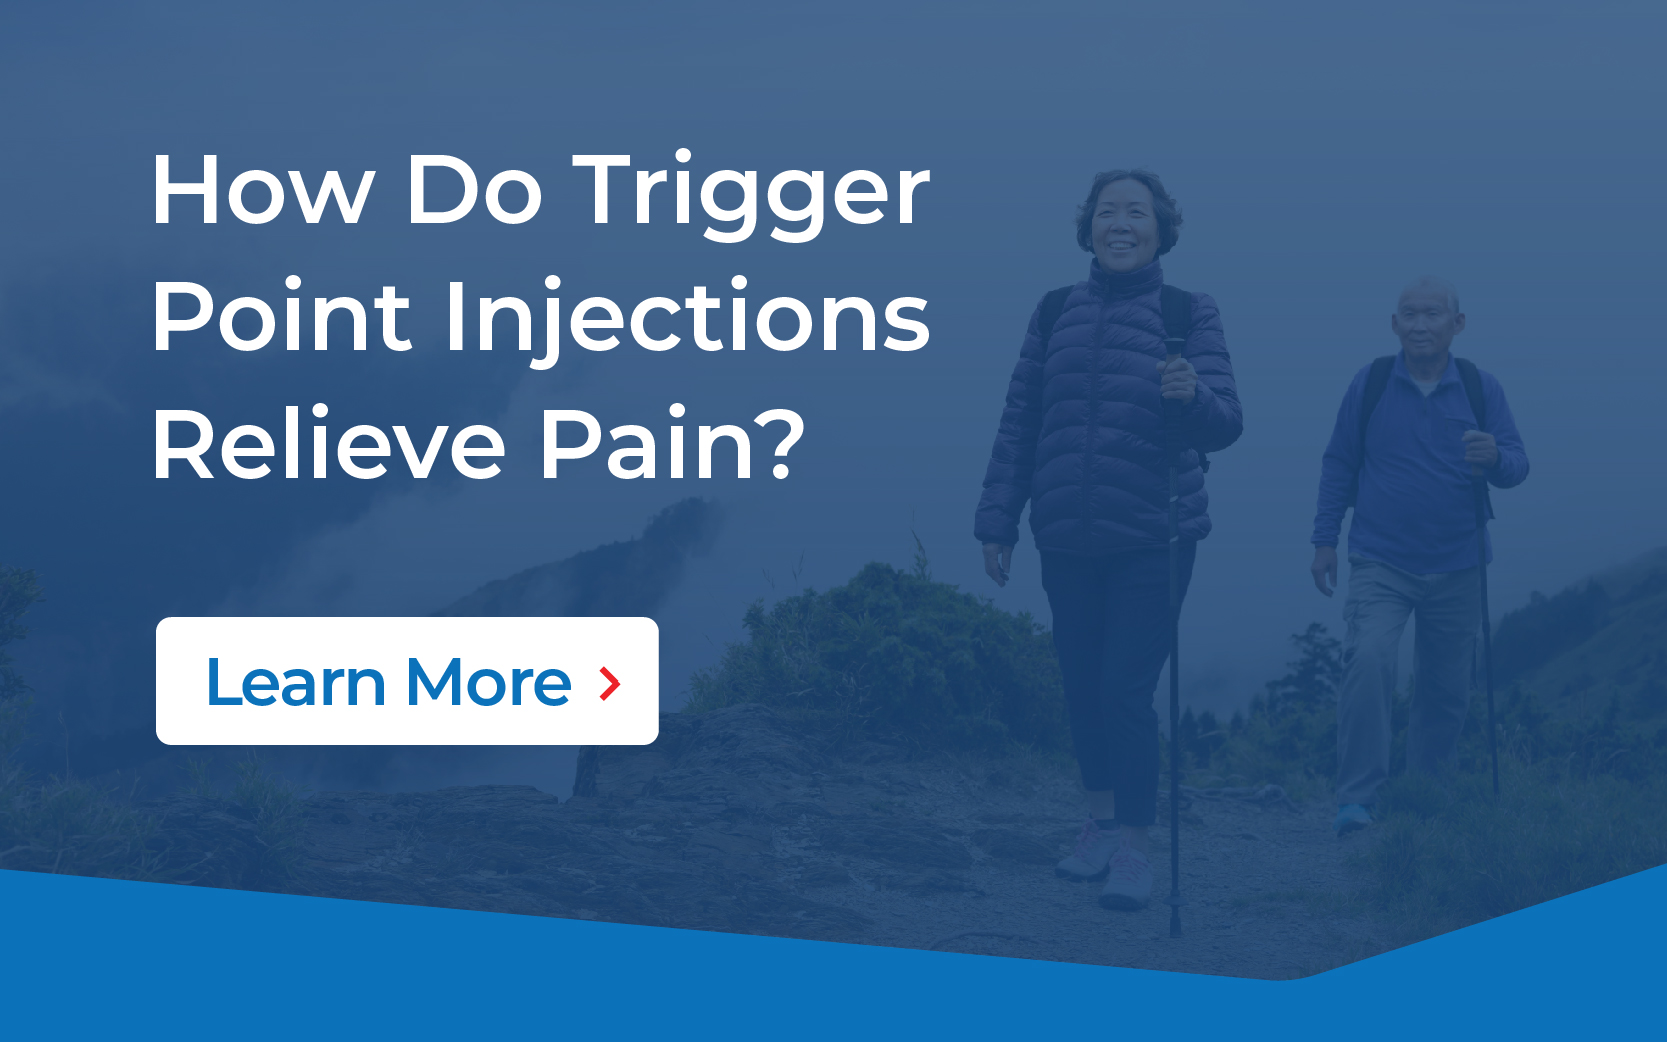 trigger point injection